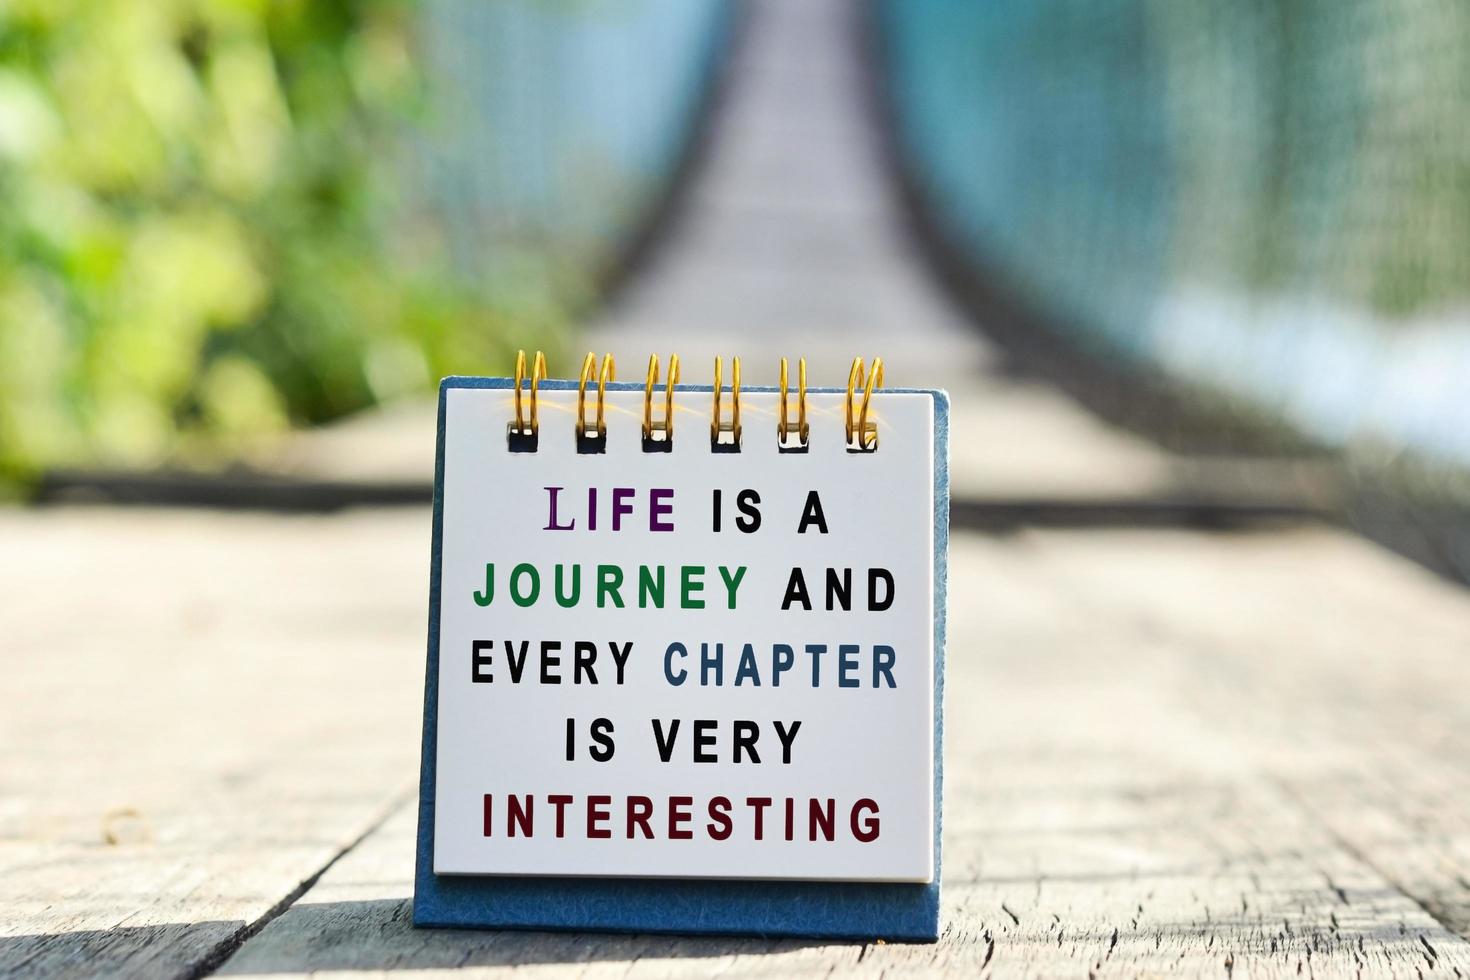 Sign that says "life is a journey and every chapter is interesting"